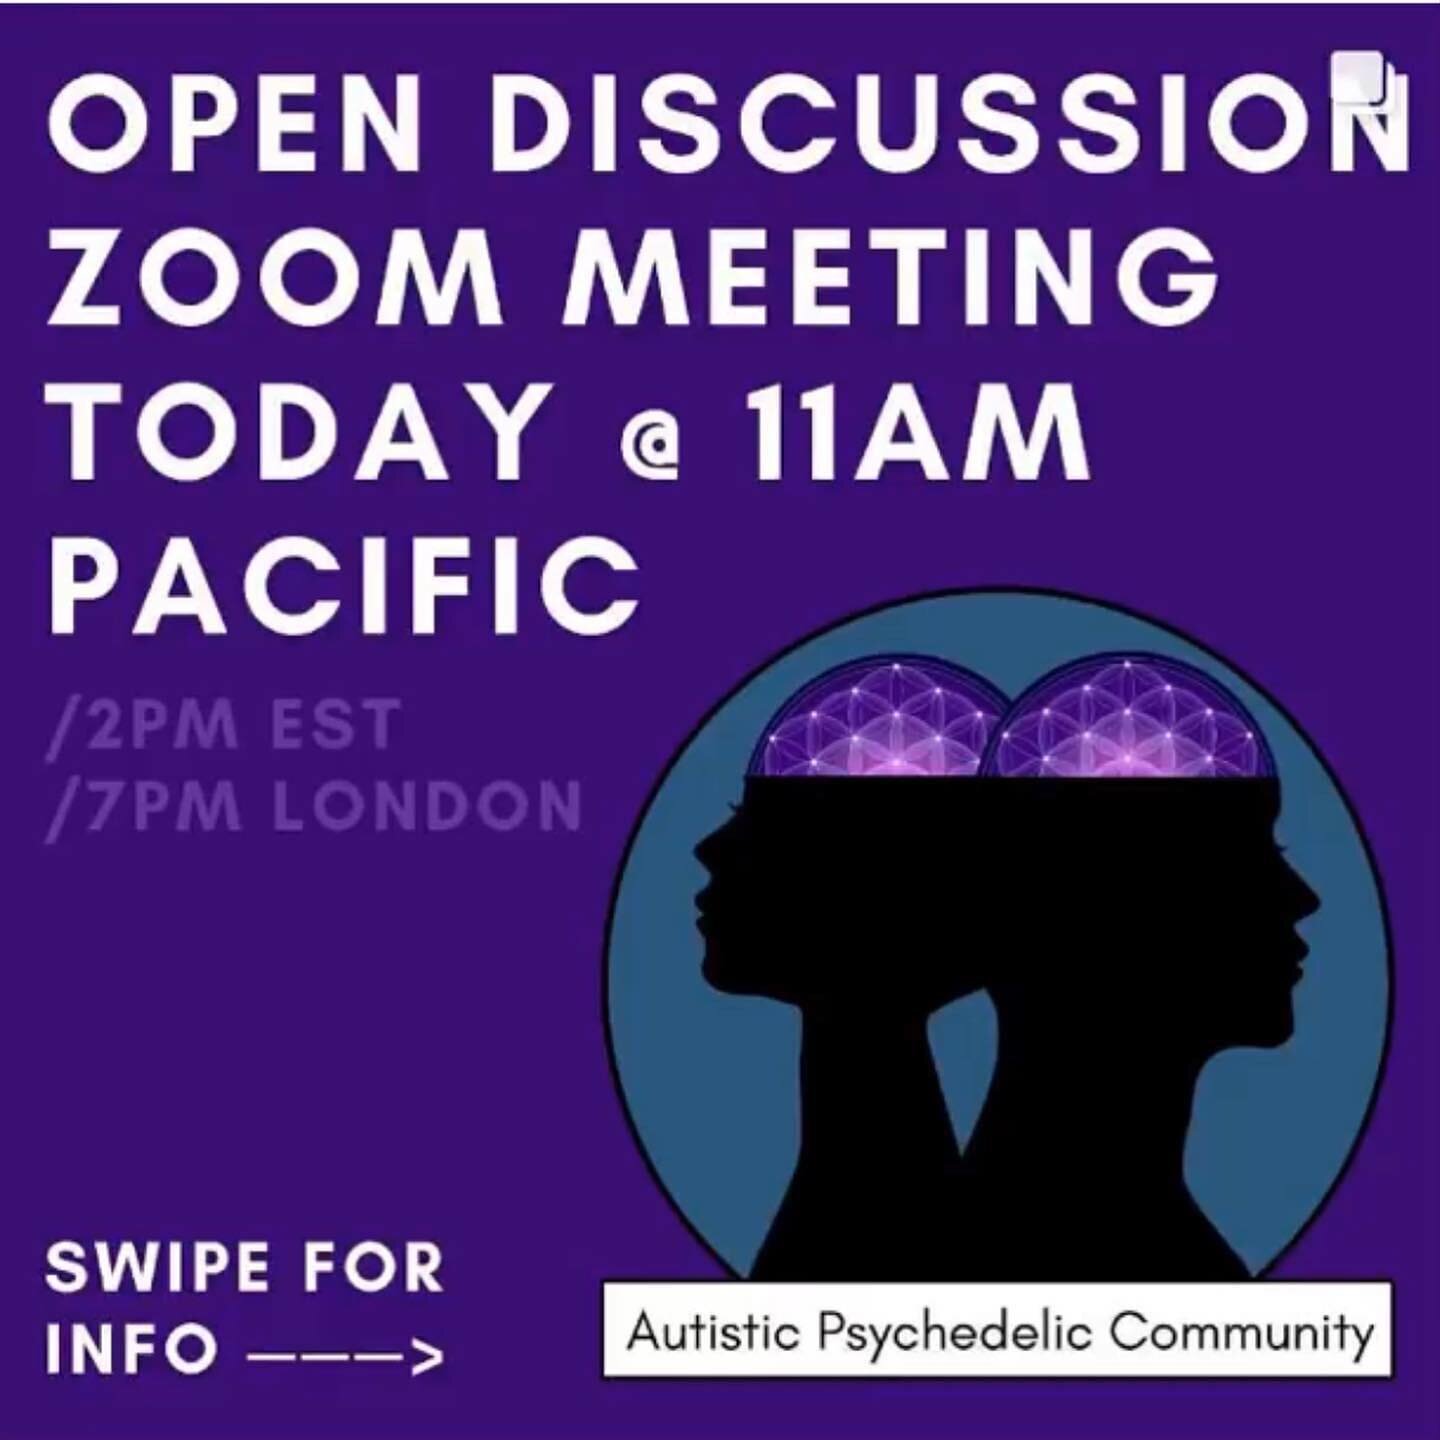 Come &amp; Meet Other Community Members. Join Link &mdash;&gt; AutisticPsychedelic.com

#autistic #actuallyautistic #neurodivergent #neurodiversity #autism